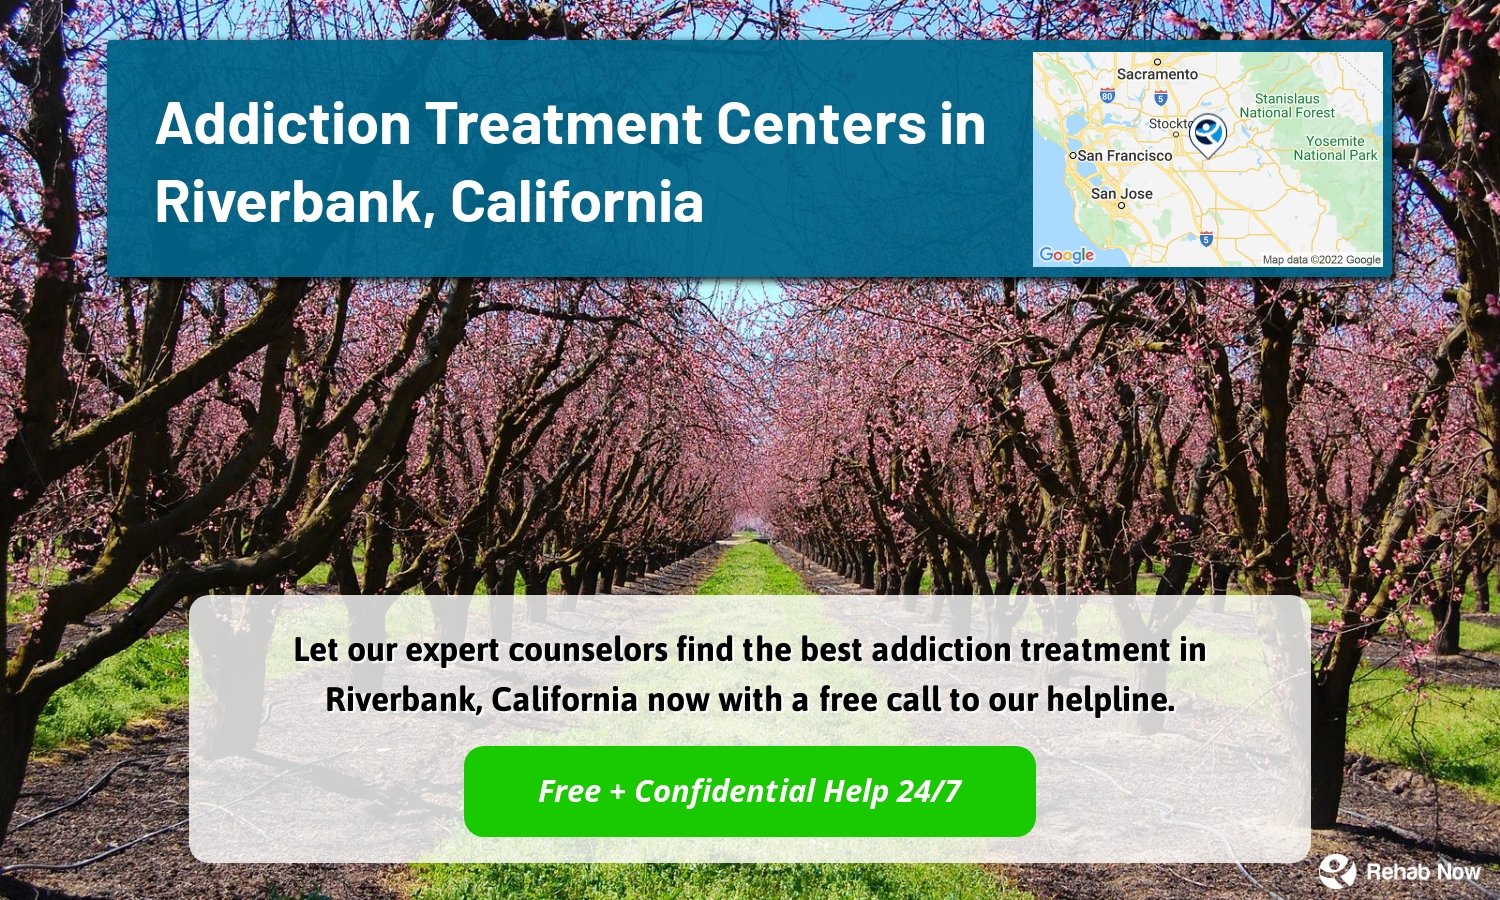 Let our expert counselors find the best addiction treatment in Riverbank, California now with a free call to our helpline.